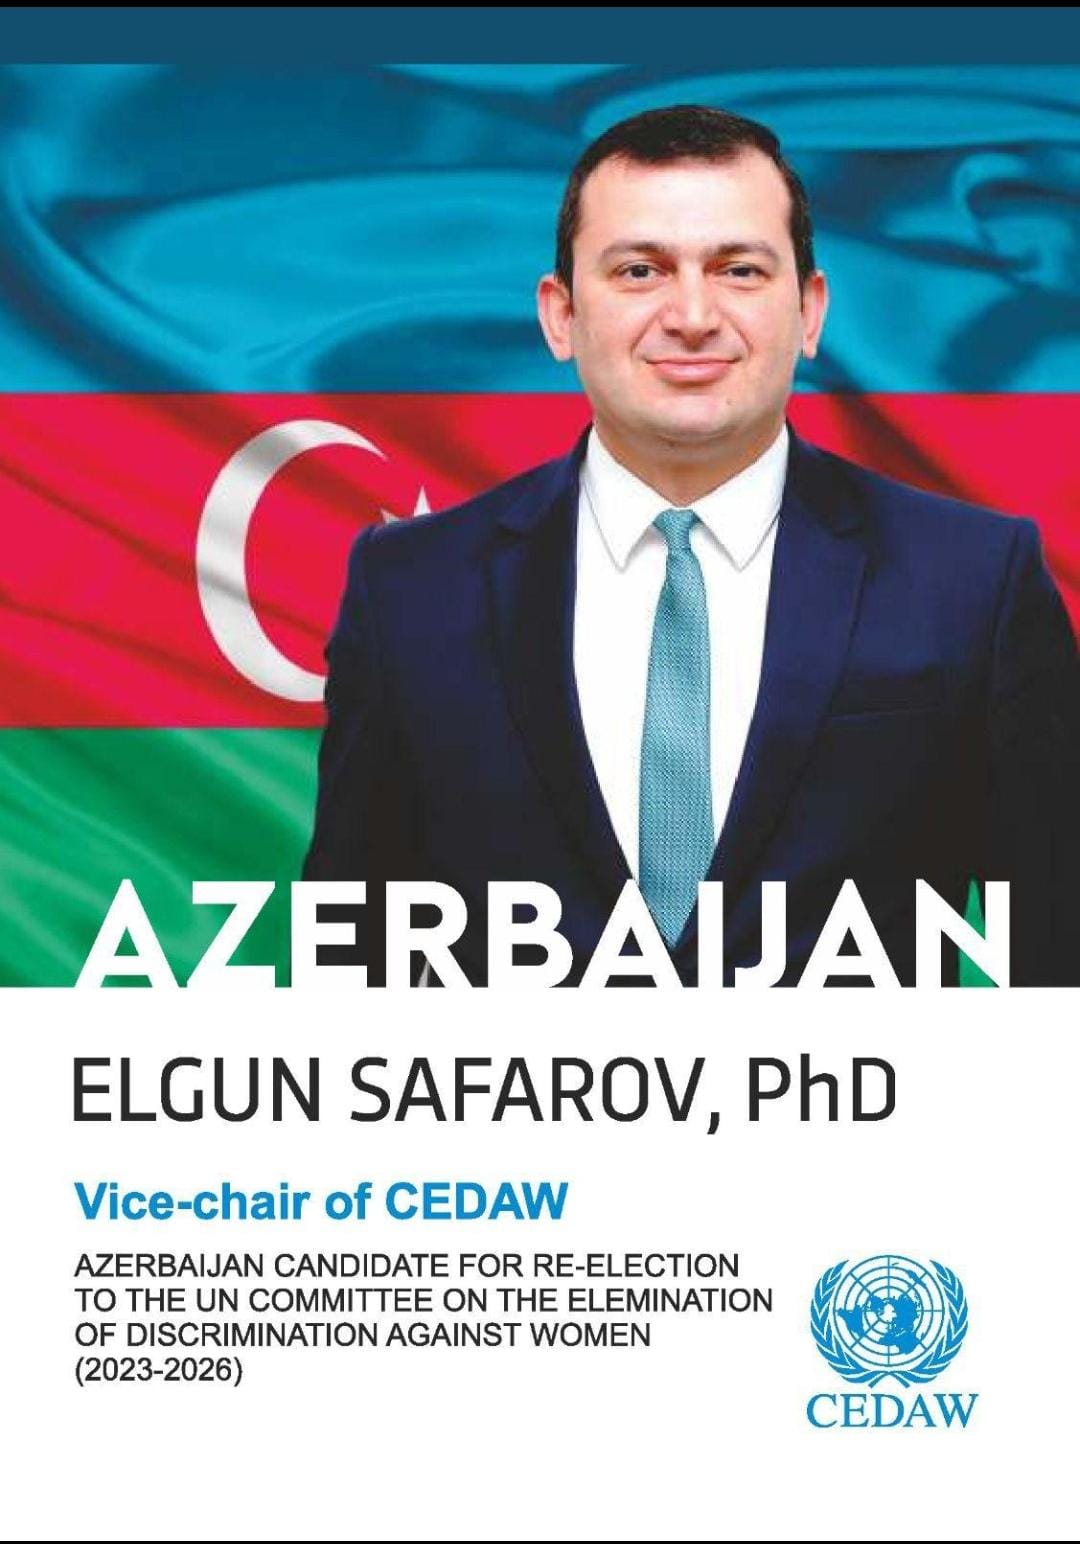 Elgun Safarov was re-elected to the UN CEDAW Committee